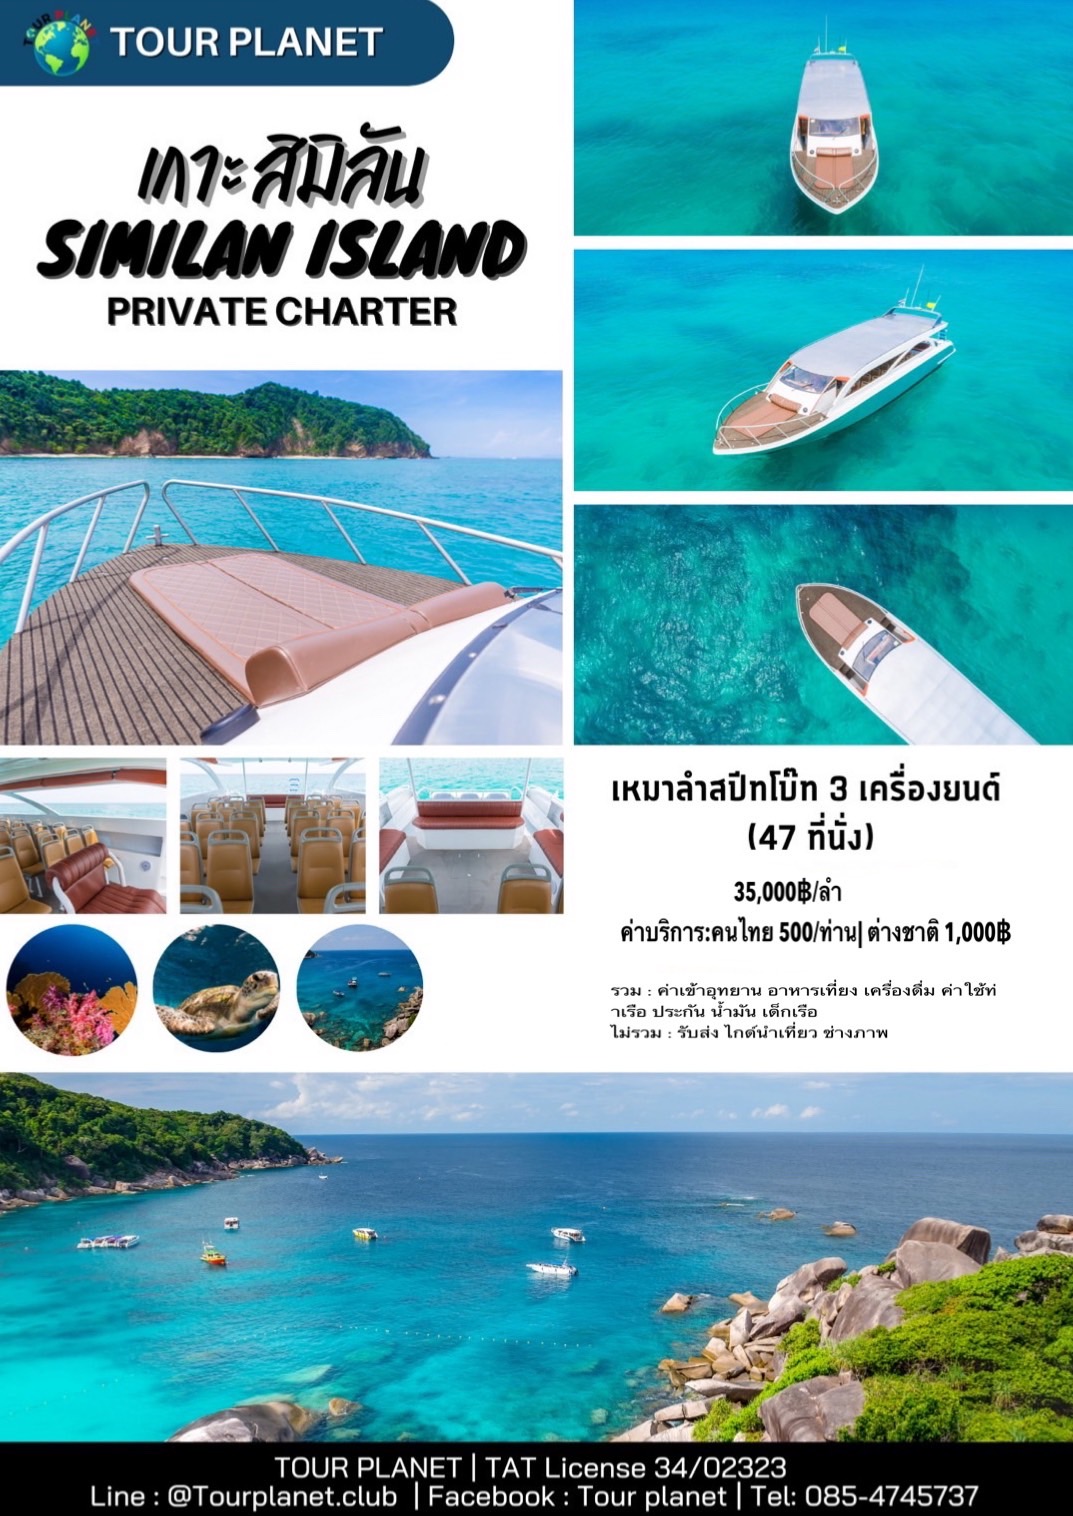 Private Charter Speedboat to Similan Island - 45 Passenger by KLM